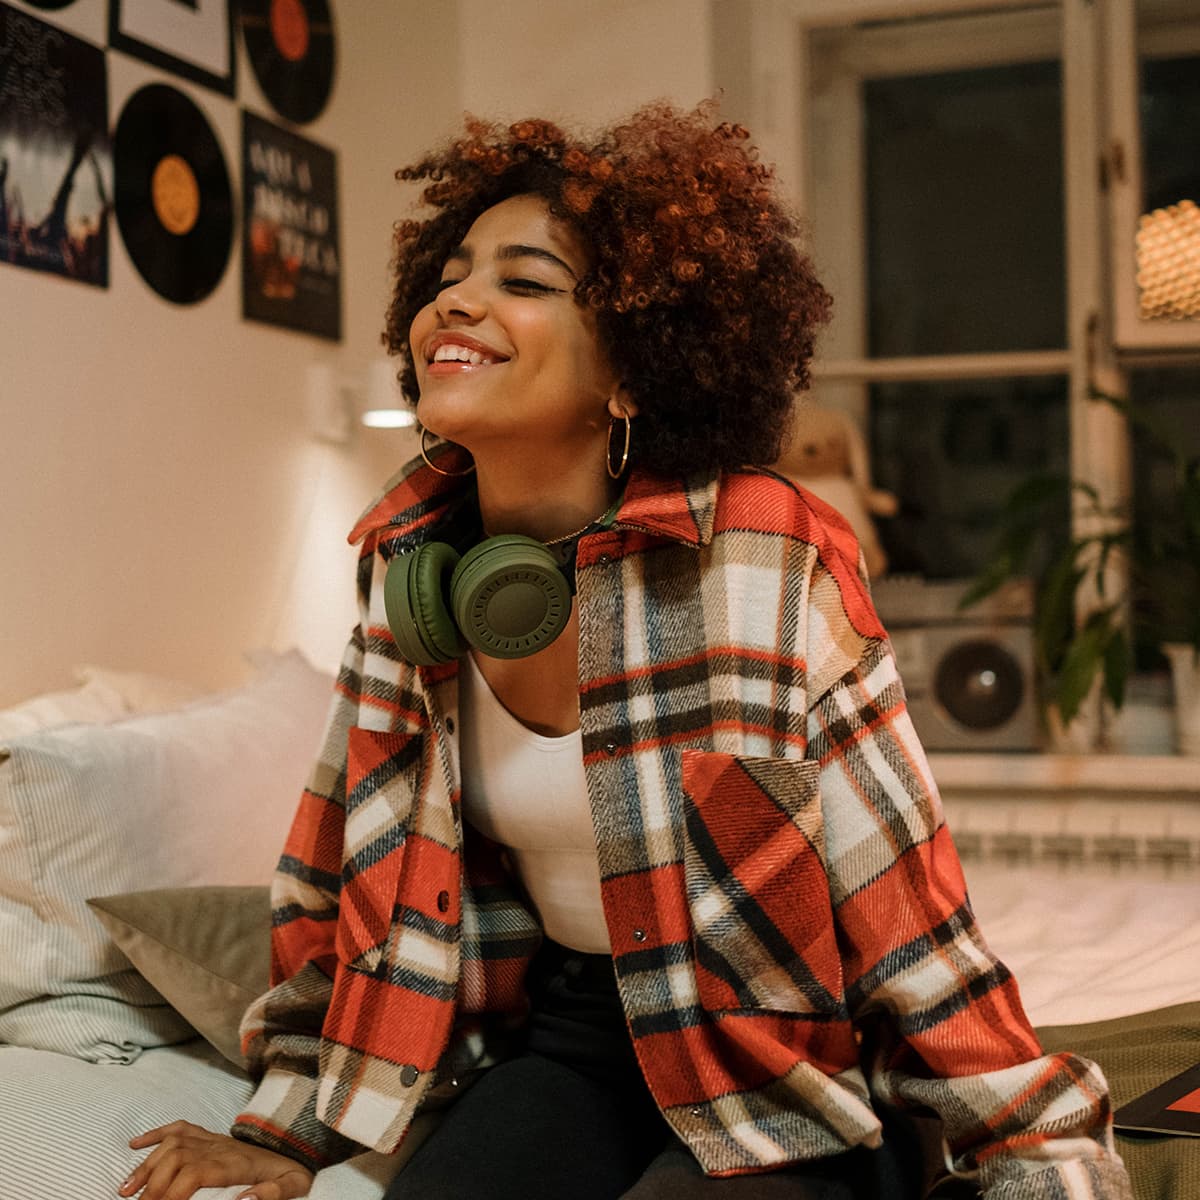 A Black person with curly red hair sitting in a bed smiling with headphones around their neck